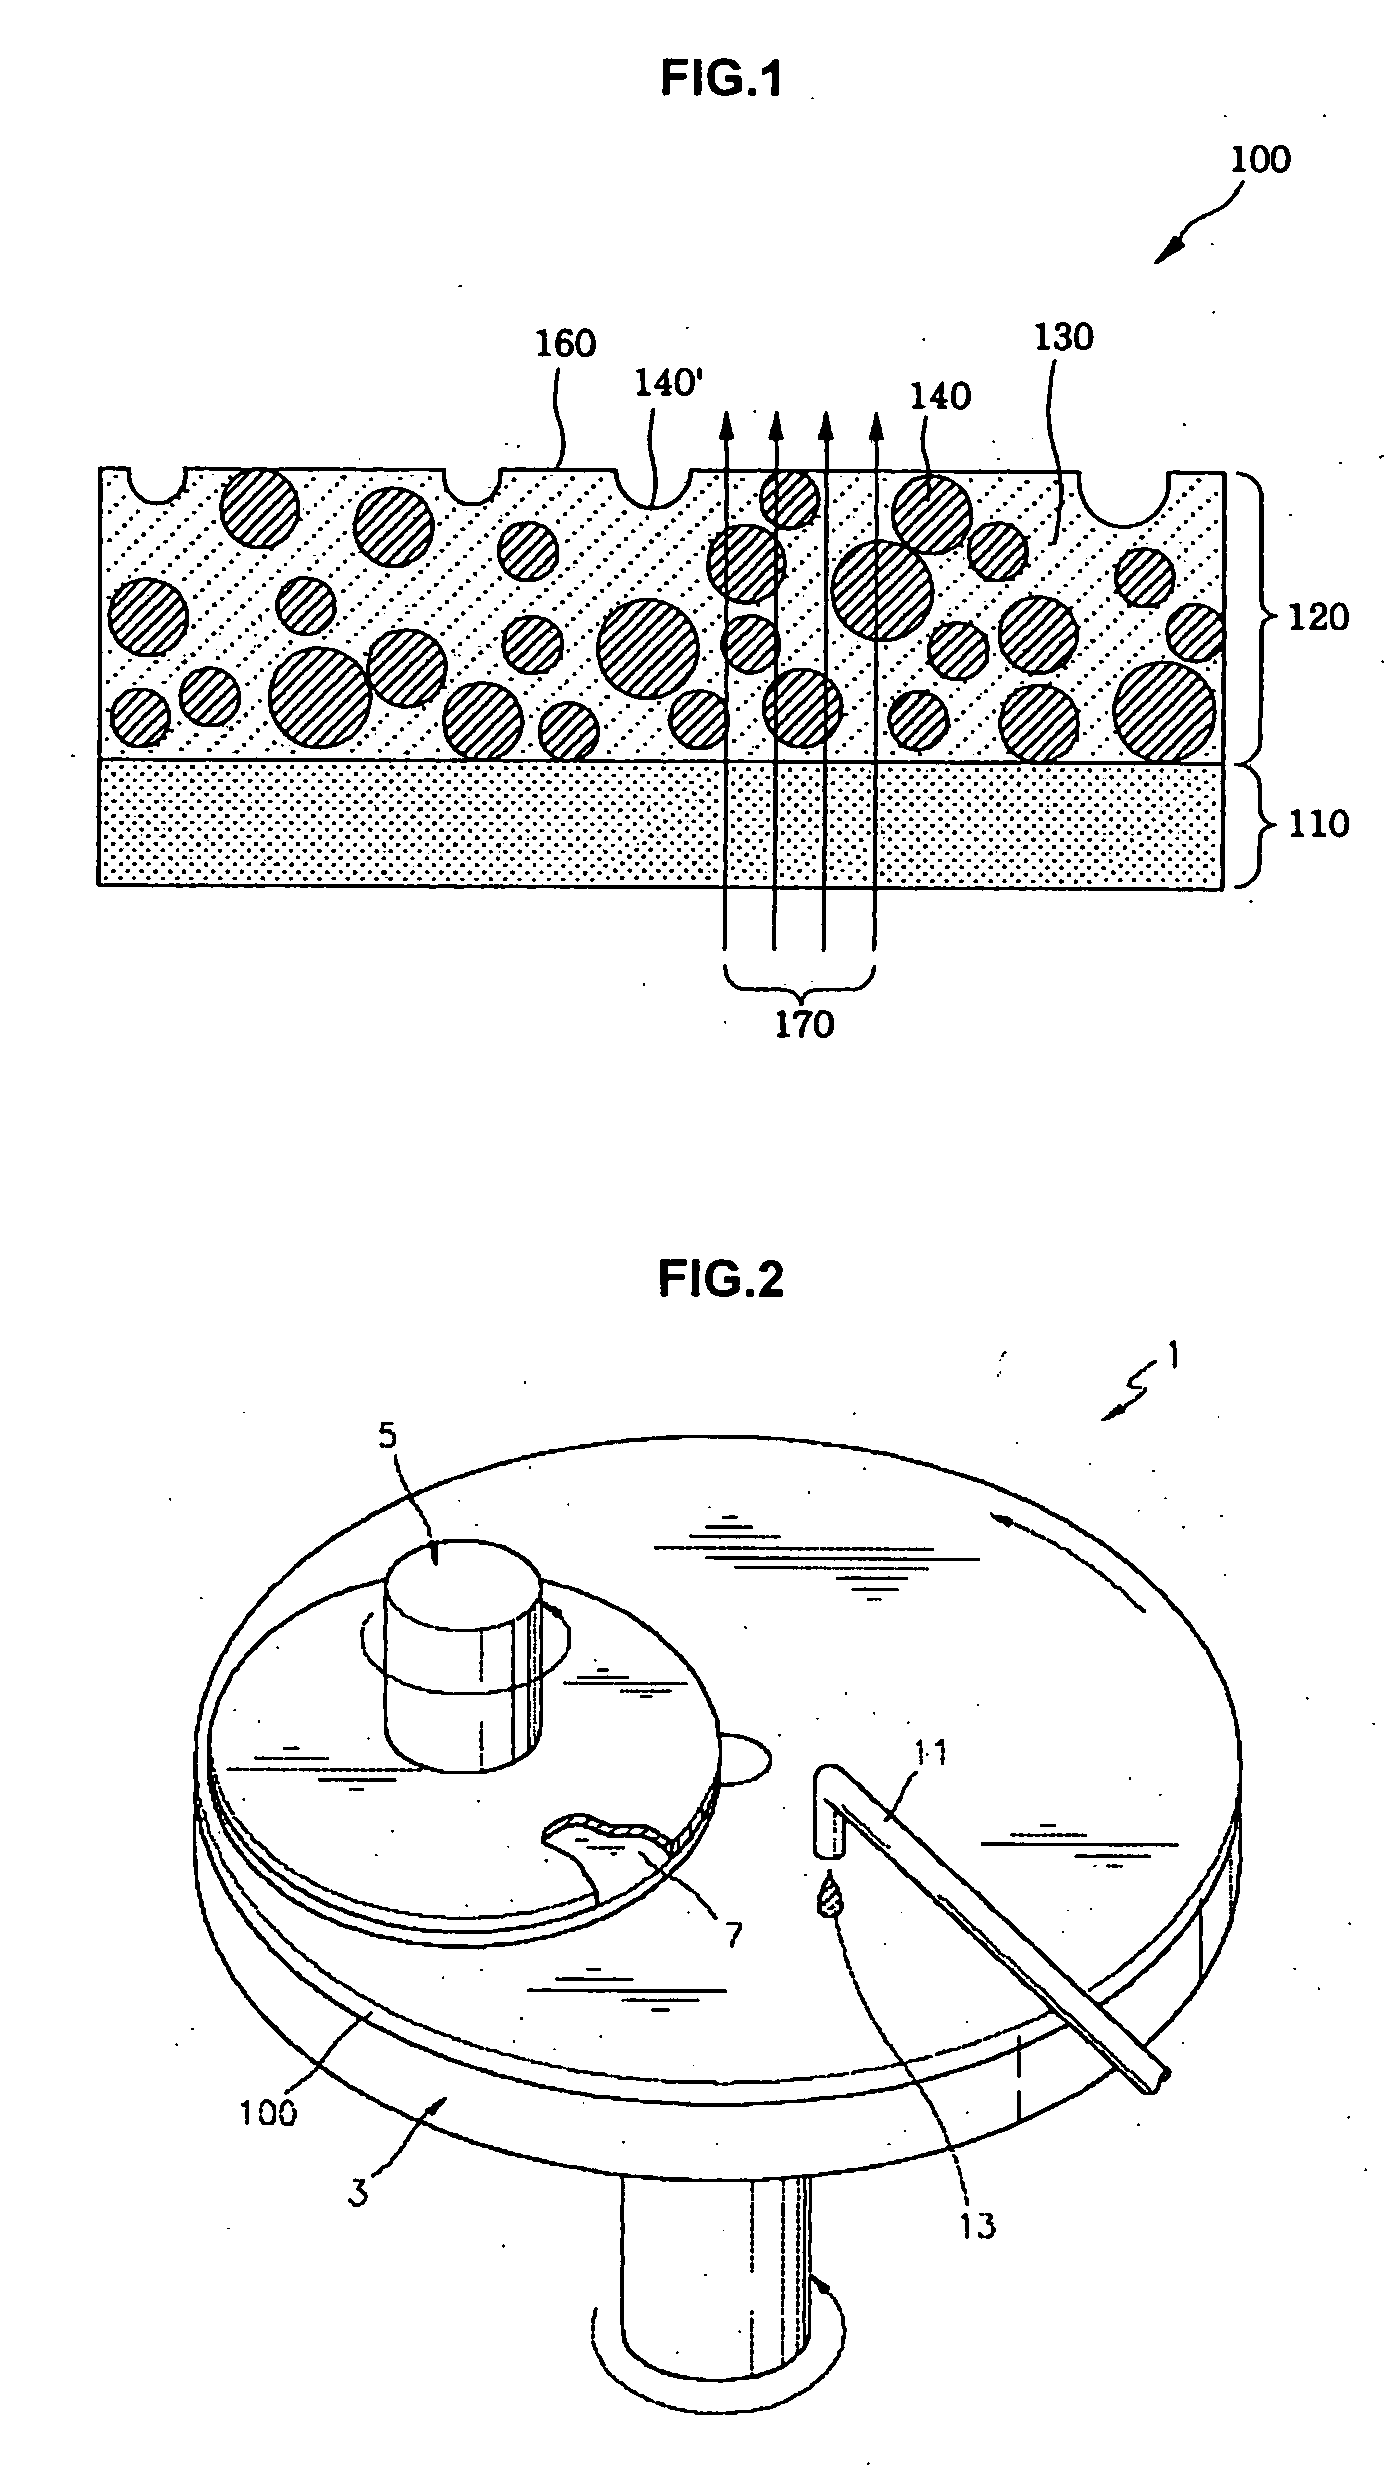 Polishing pad containing embedded liquid microelements and method of manufacturing the same